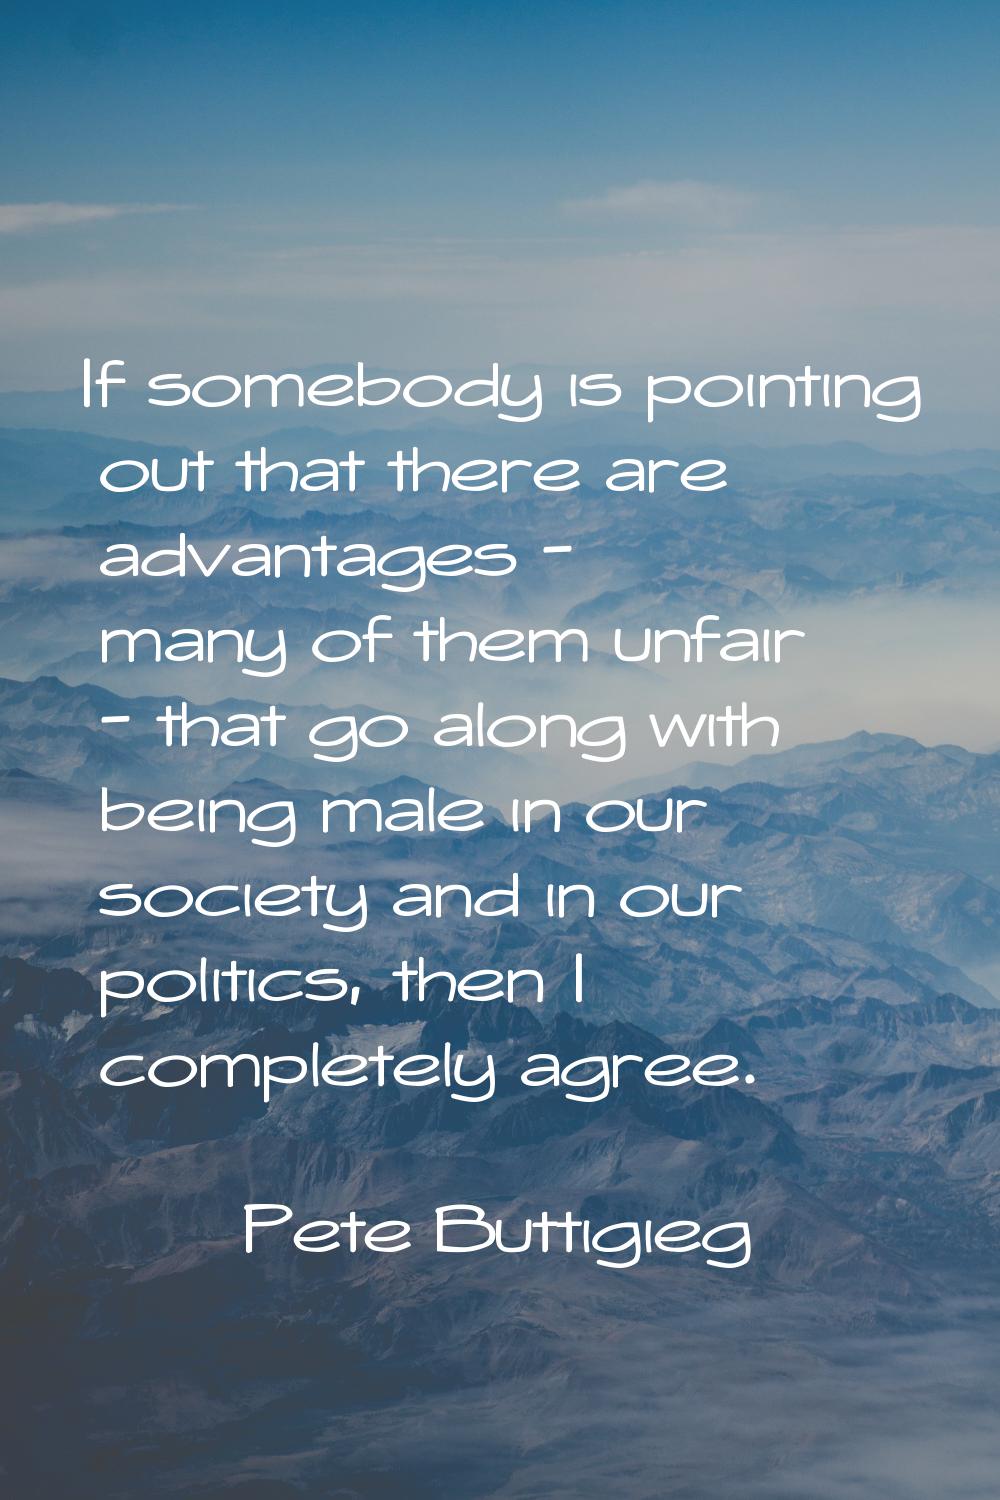 If somebody is pointing out that there are advantages - many of them unfair - that go along with be